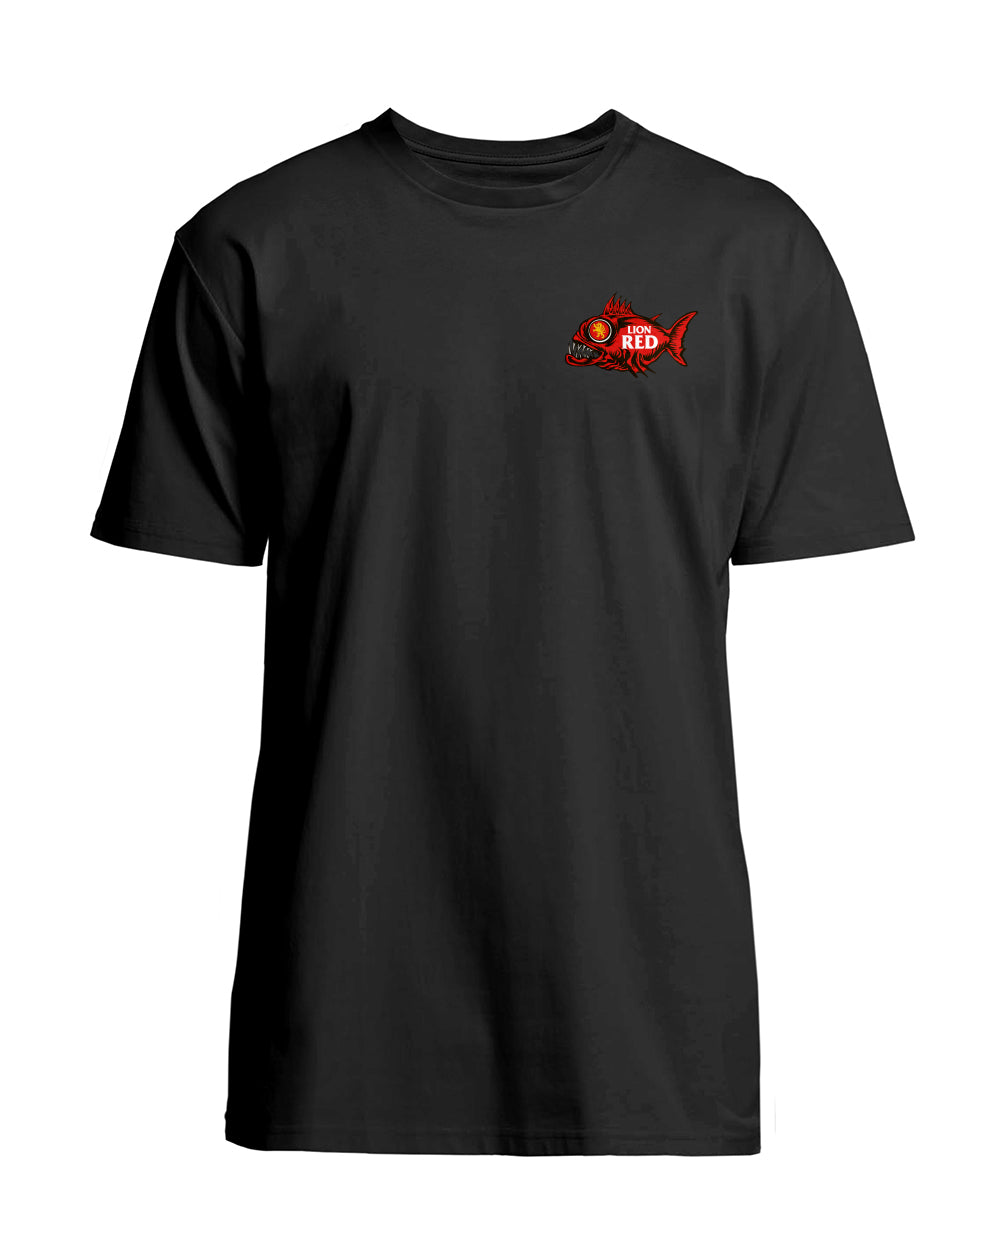 Lion Red Tee Angry Fish -  Beer Gear Apparel & Merchandise - Speights - Lion Red - VB - Tokyo Dy merch